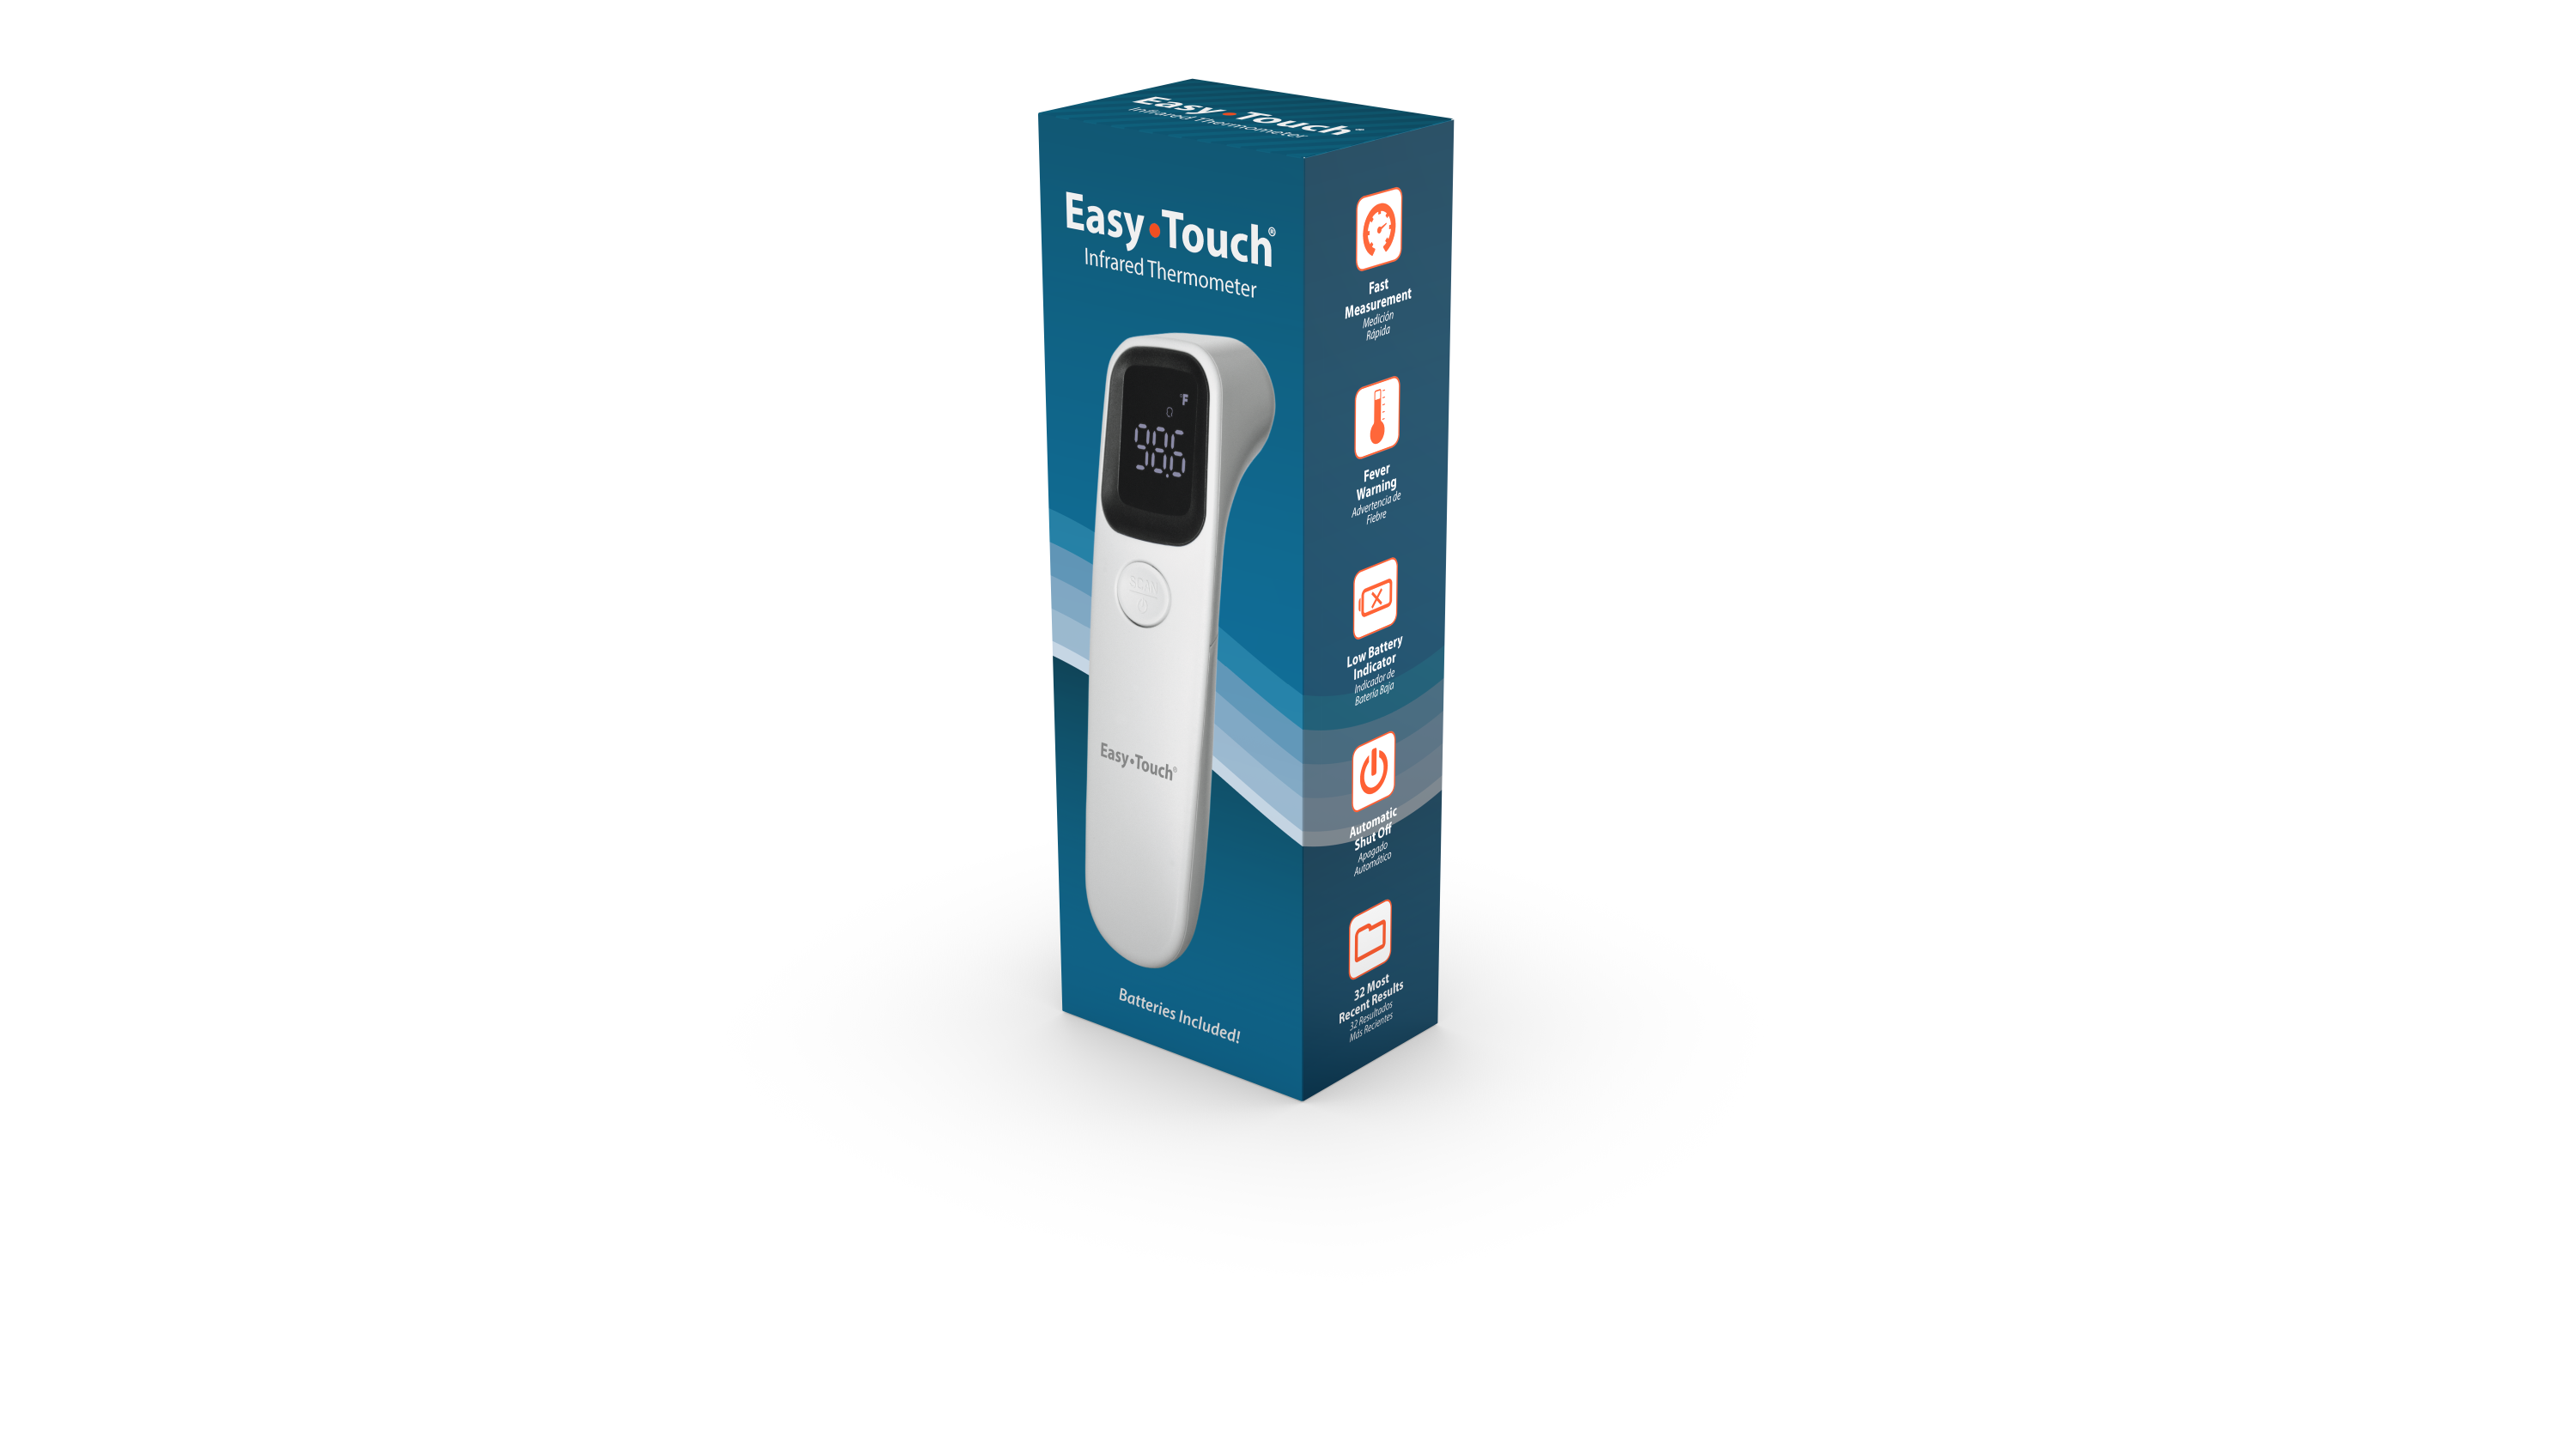 The EasyTouch® Infrared Thermometer offers an attractive and reliable way to take body temperature measurements from the forehead. The non-contact, compact, one-button design makes operation safe, convenient, and simple.